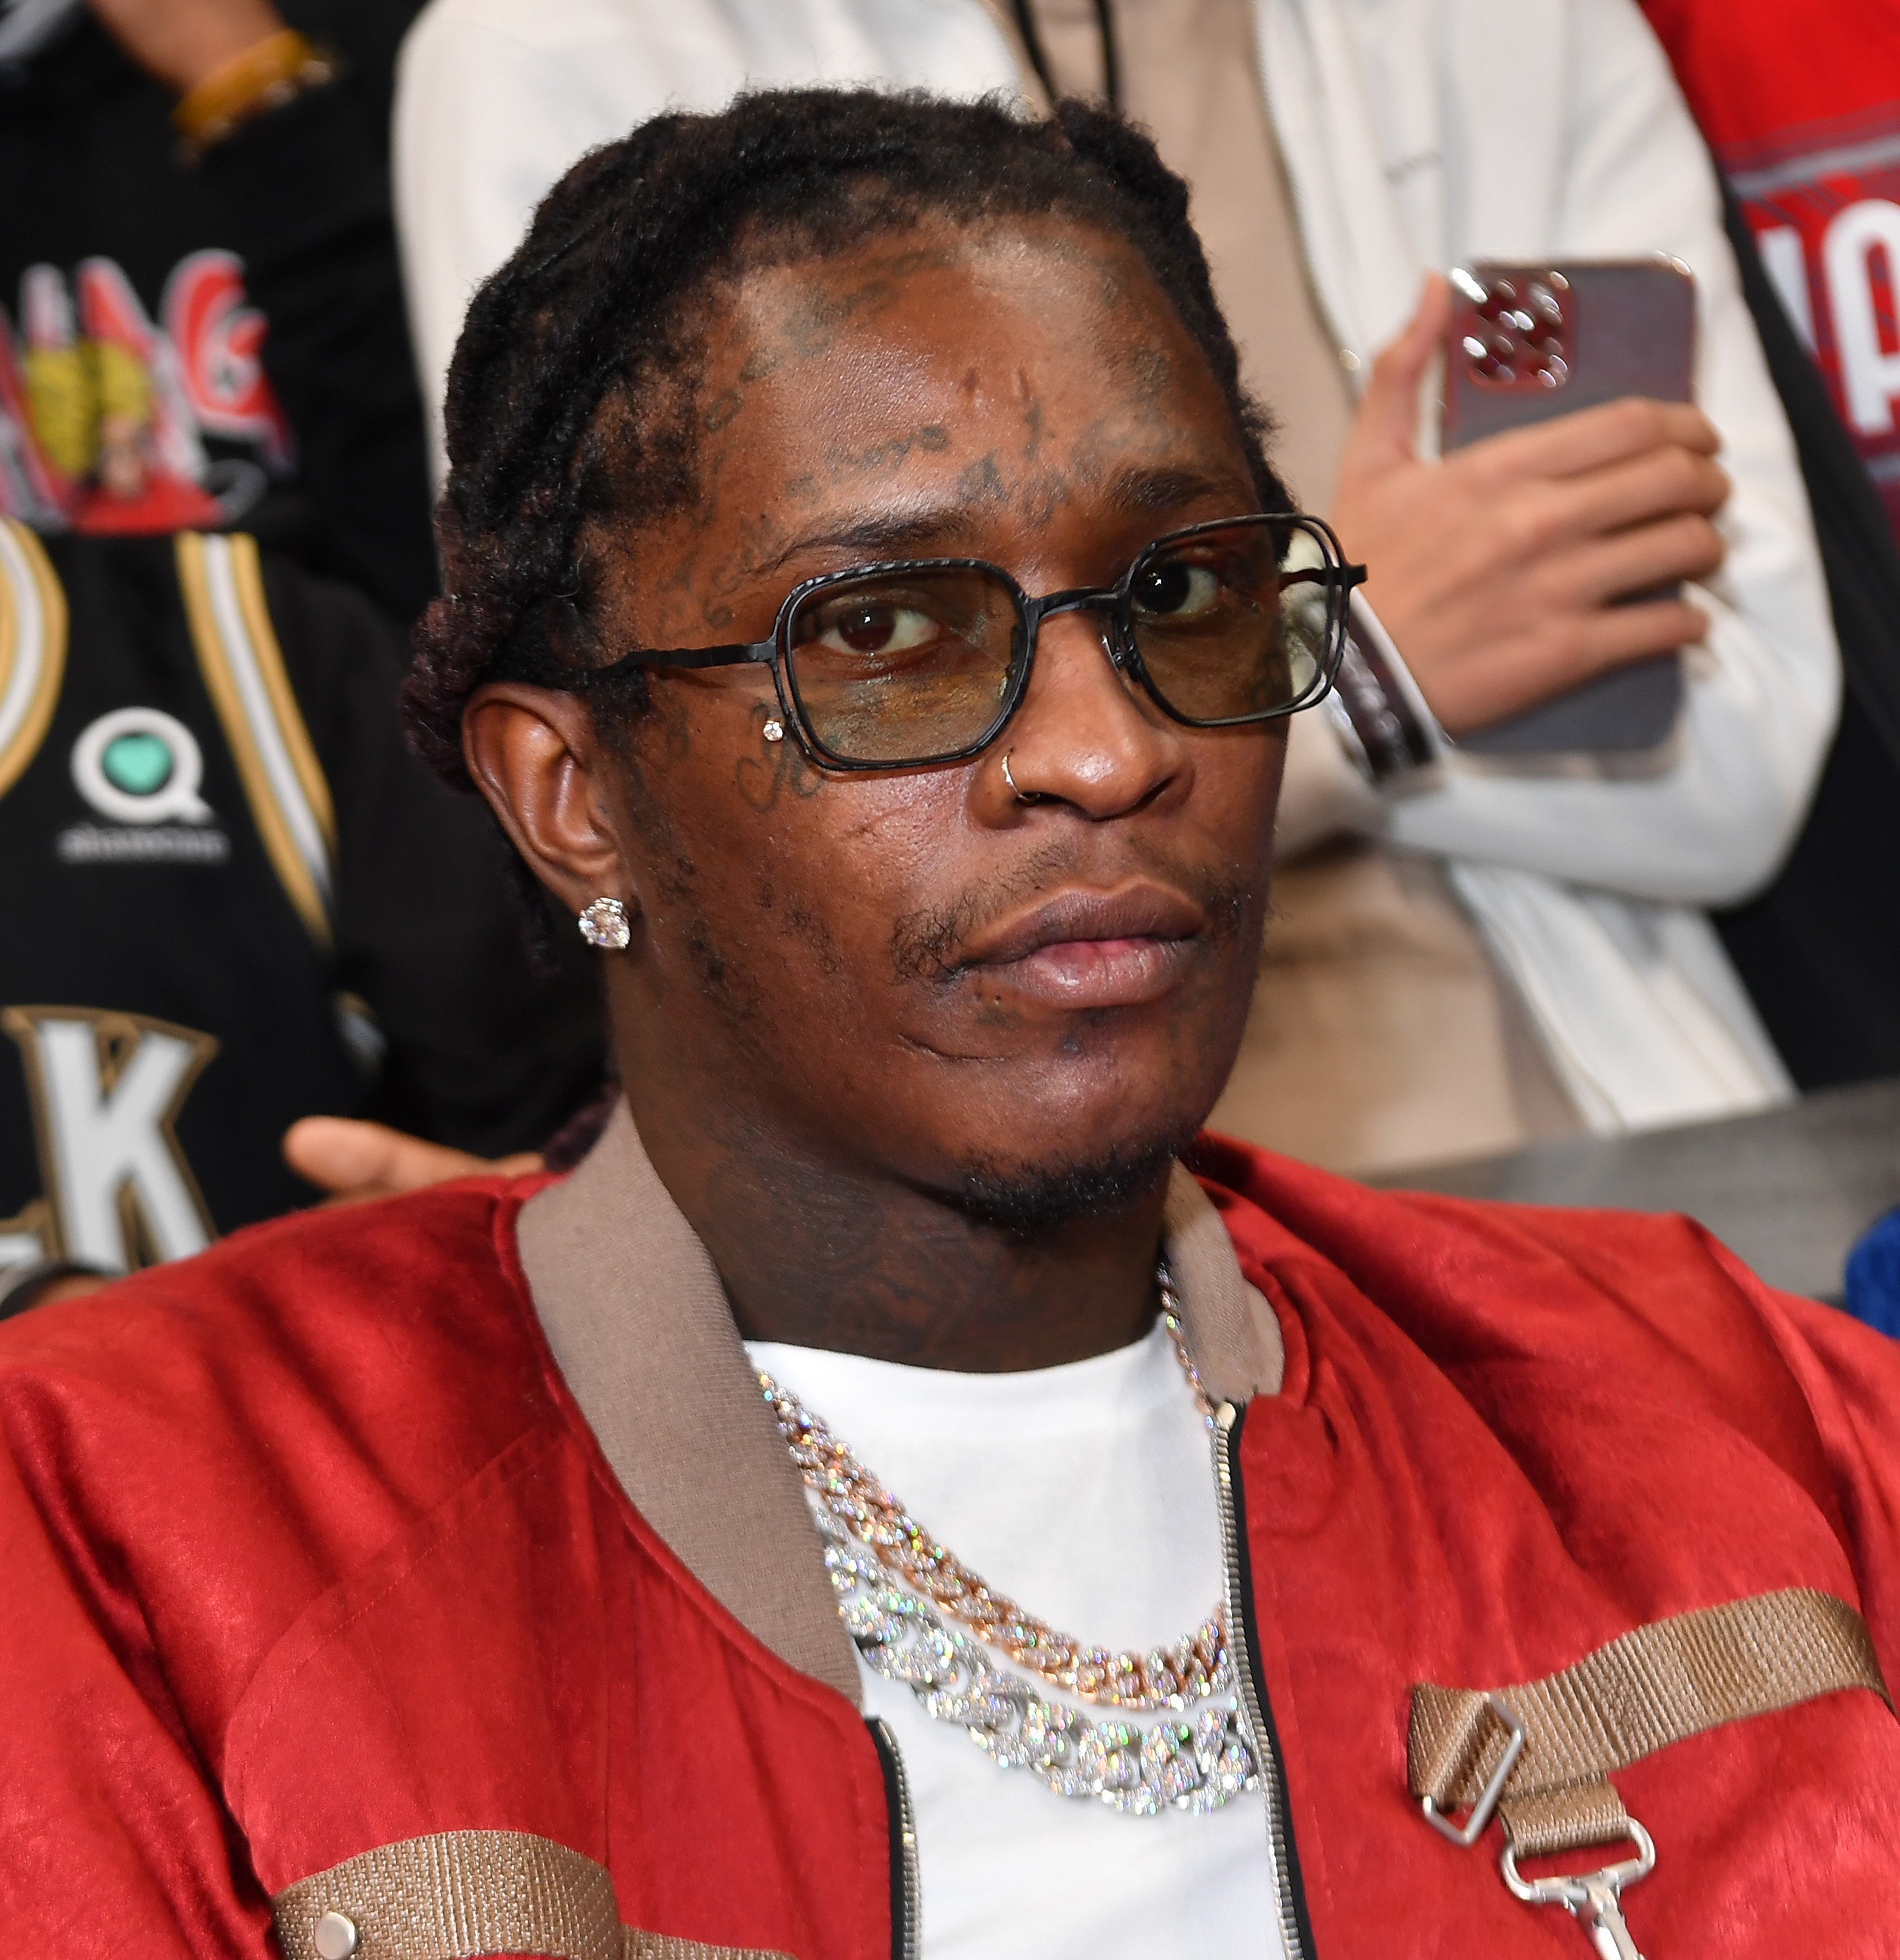 Rapper Young Thug attends the game between the Phoenix Suns and the Atlanta Hawks at State Farm Arena on February 03, 2022 in Atlanta, Georgia | Source: Getty Images